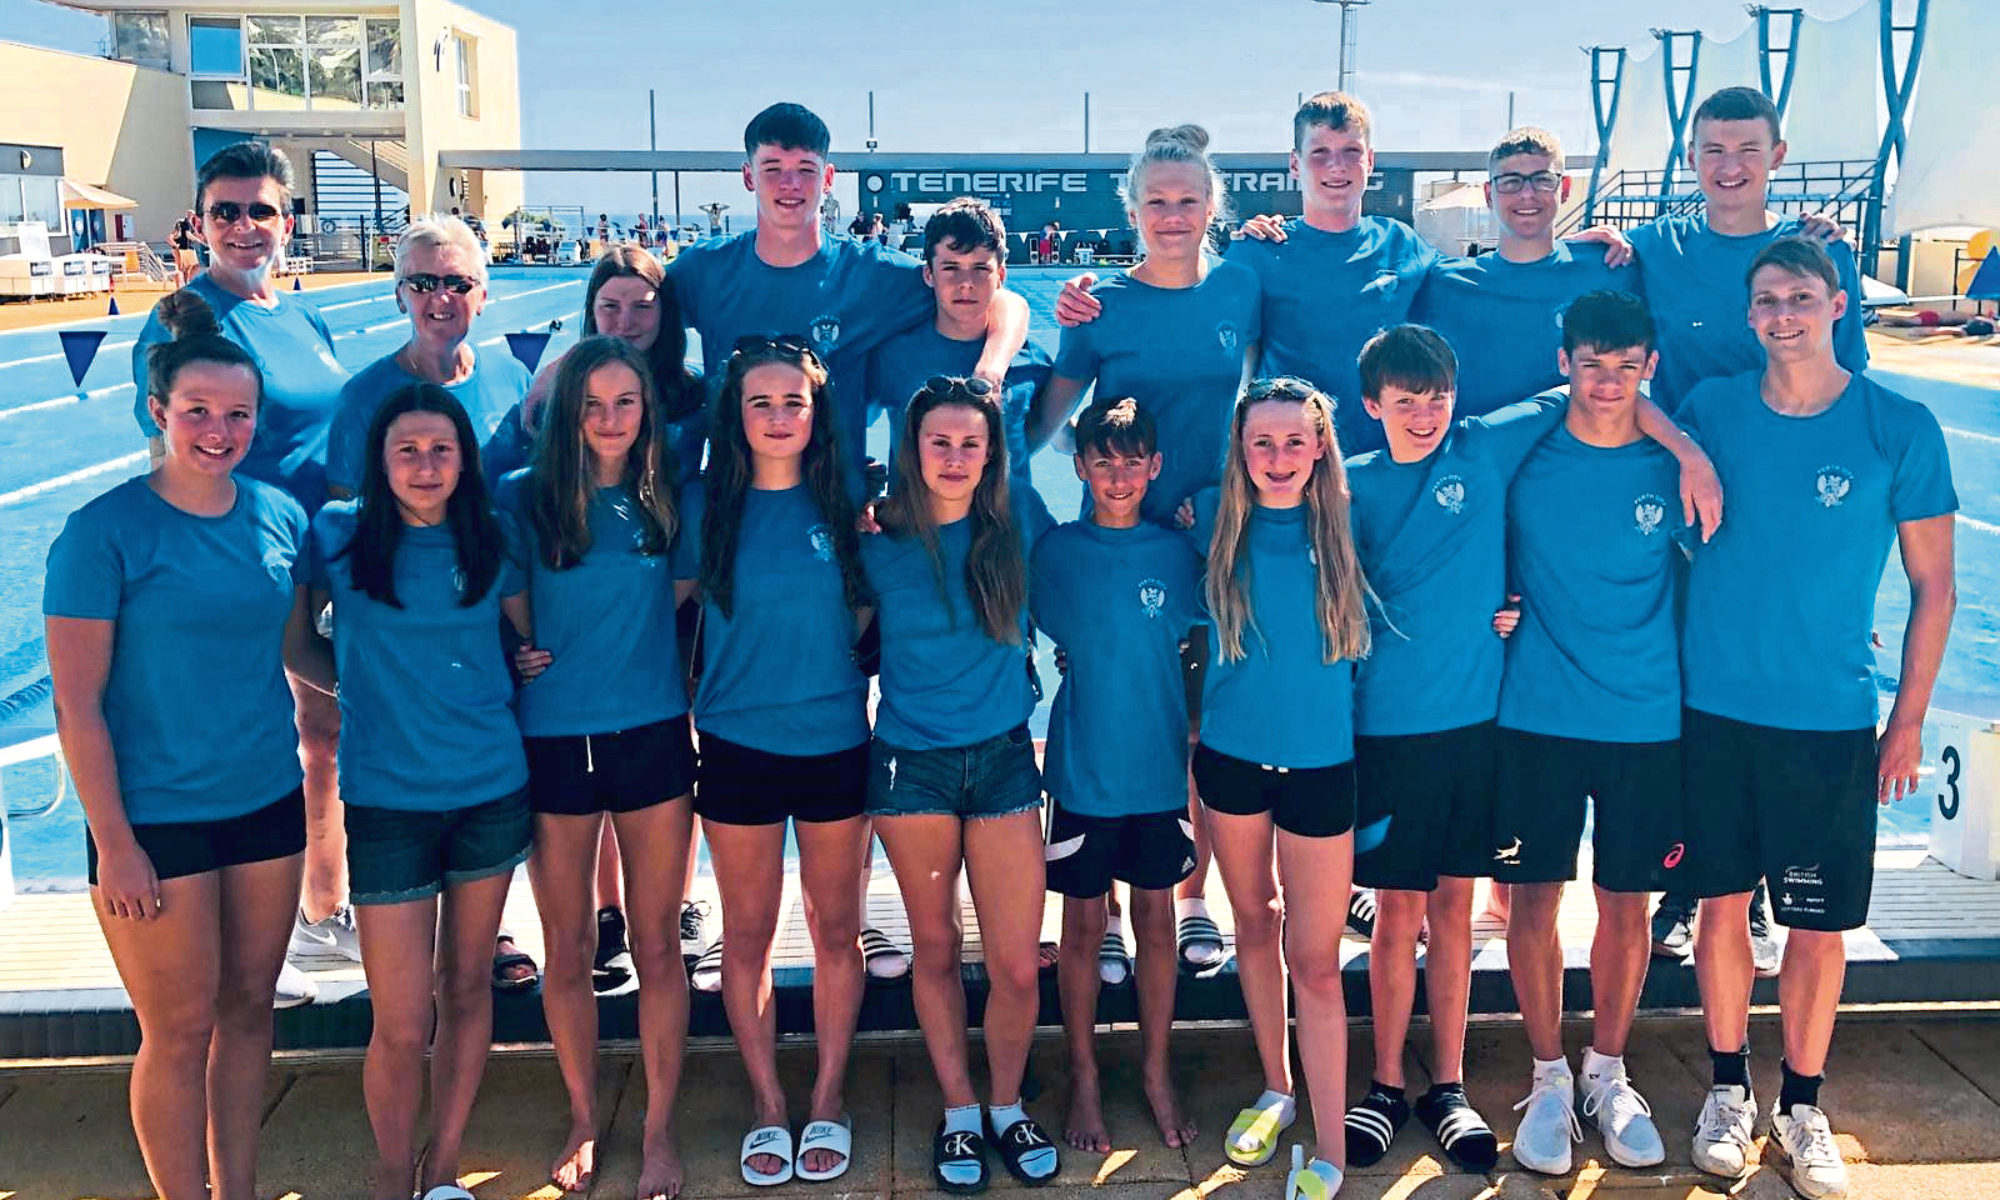 Members of Perth City Swim Club's performance squad have returned to Scotland after completing a successful week's warm weather training in Tenerife.